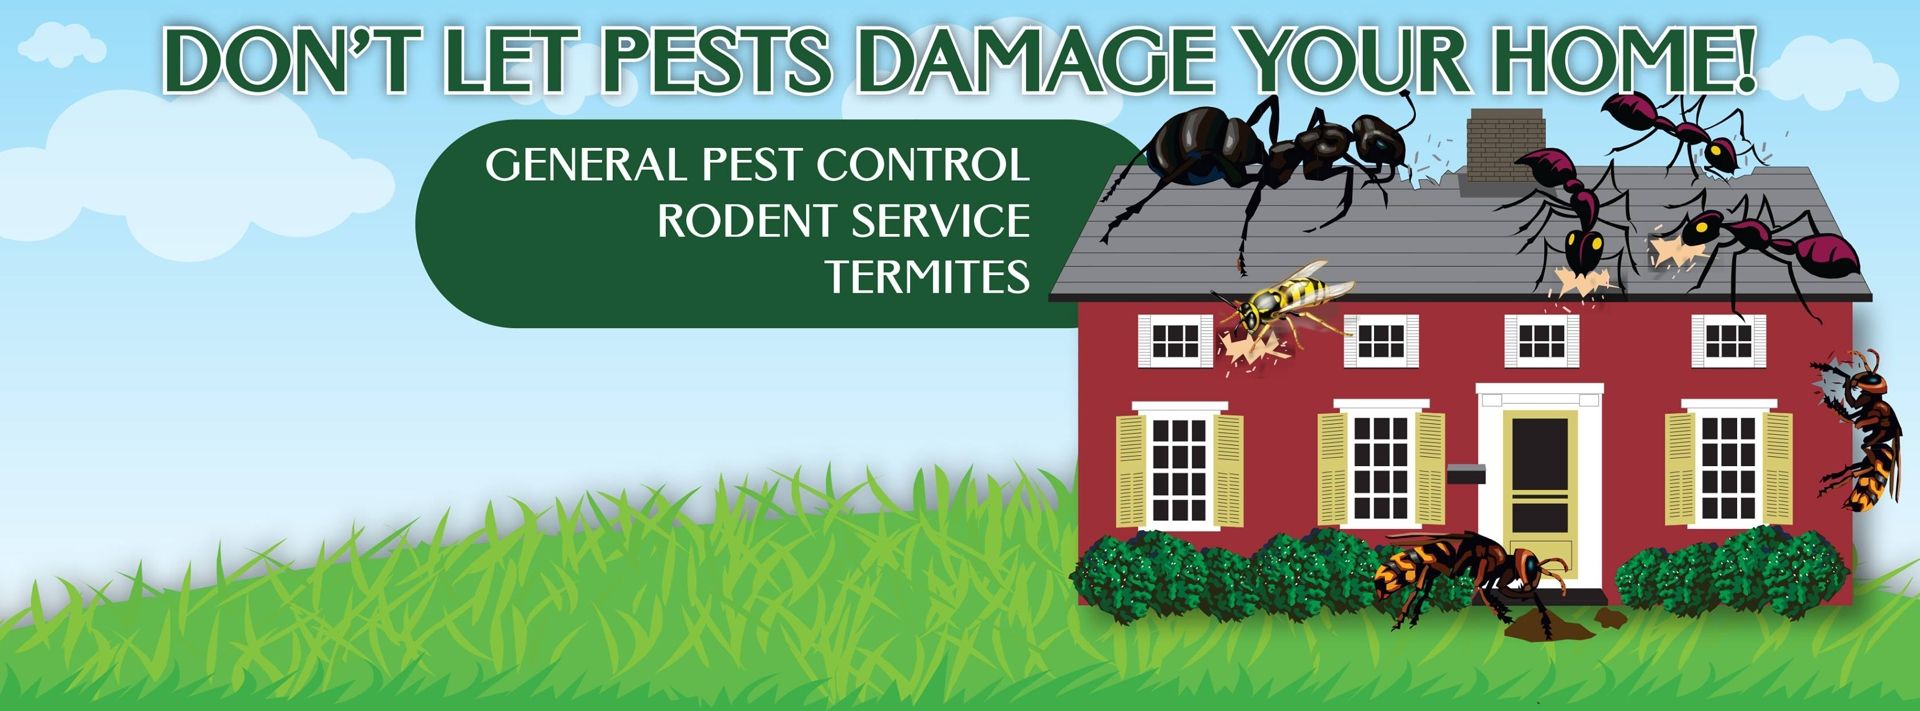 Pest Control in CT: Rodents, Termites, Bed Bugs – Exterminator in Brookfield, Danbury, Bethel, Wilton, Fairfield County by Effective Pest Management